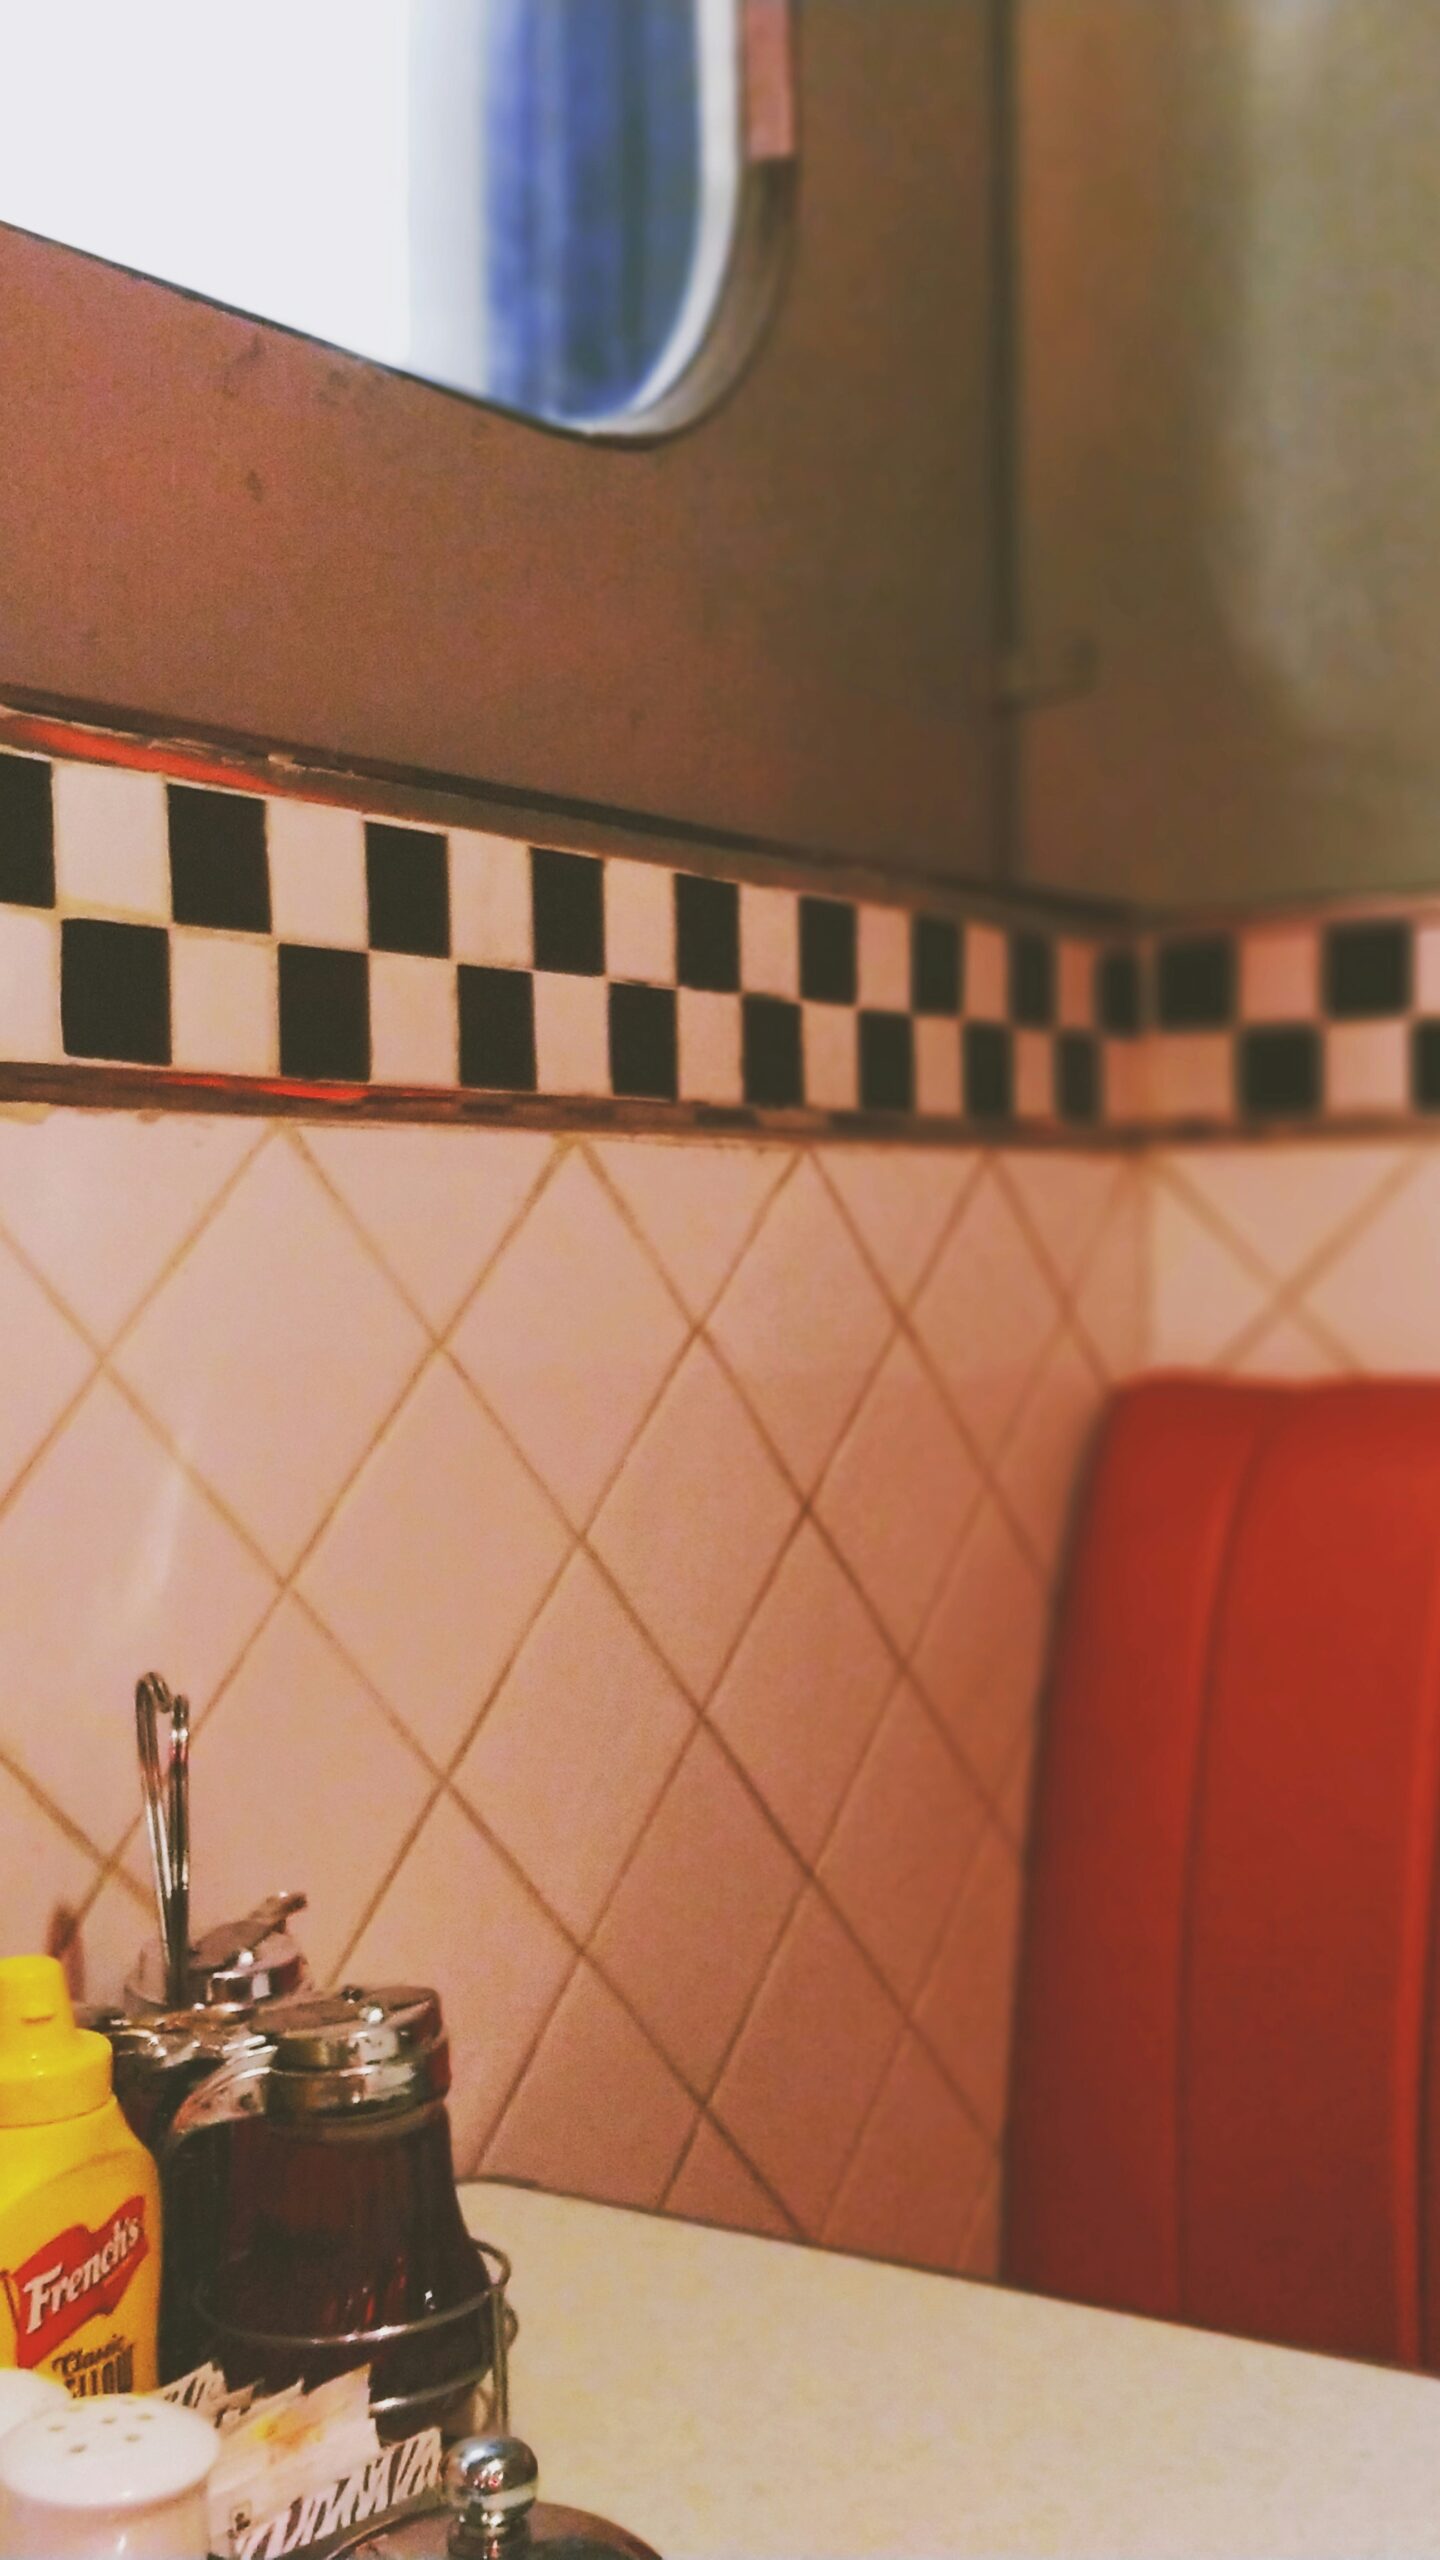 The white tiles and red seats found in a diner